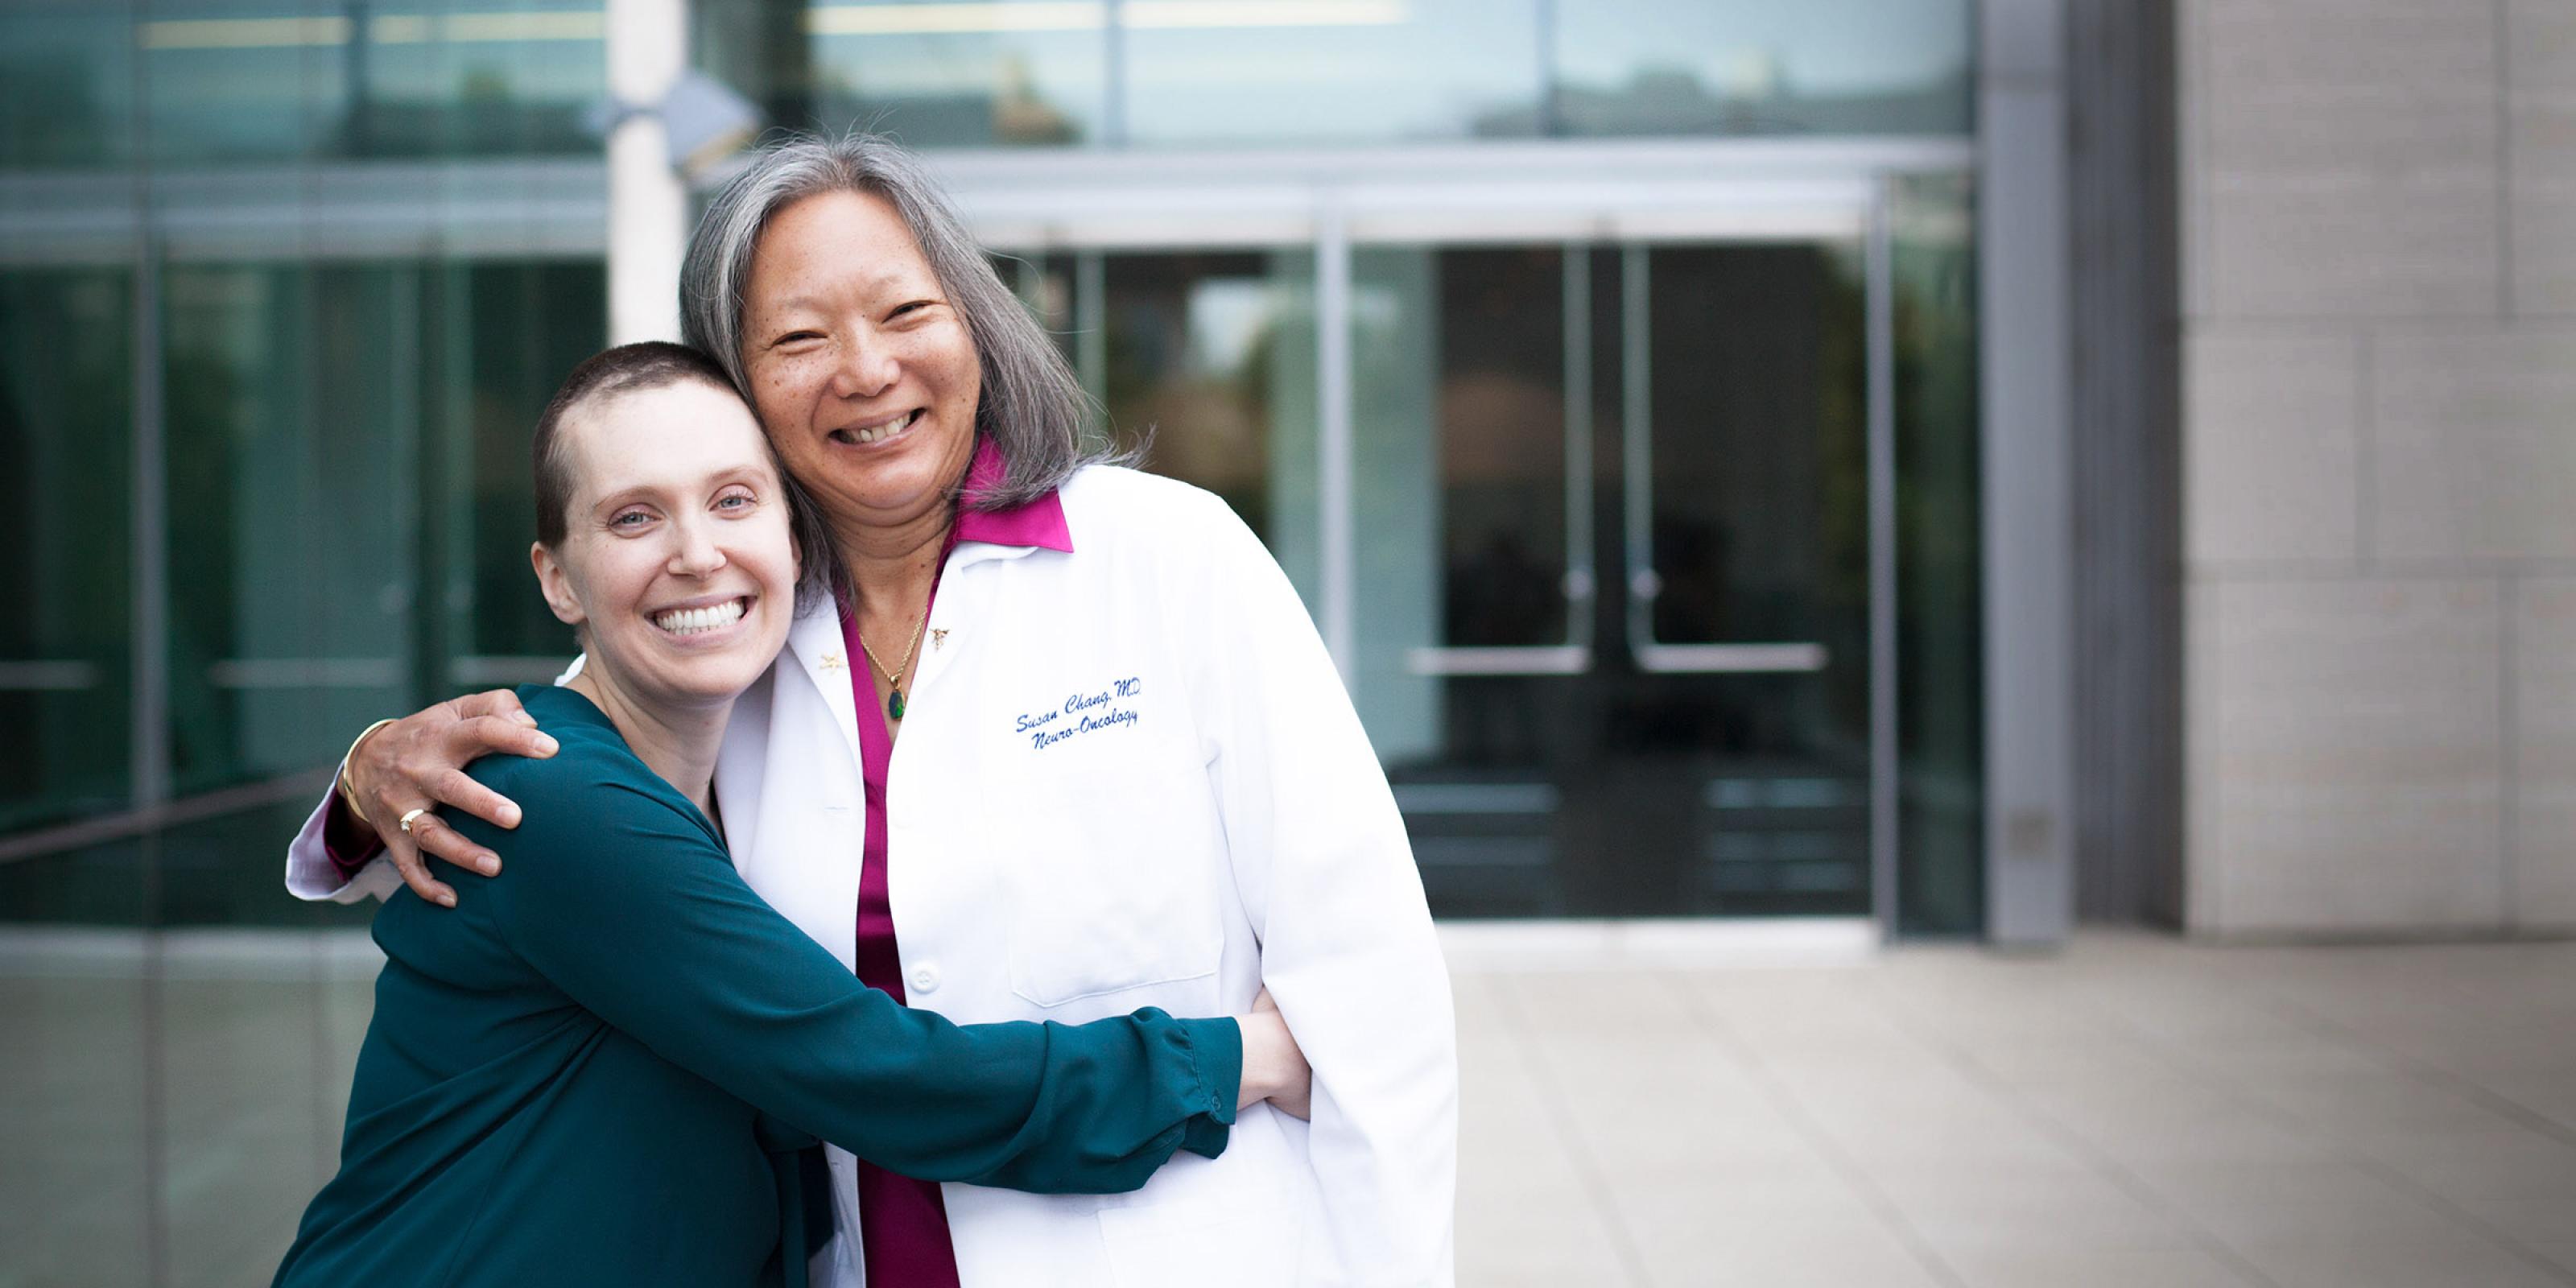 UCSF neuro-oncologist Susan Chang with patient